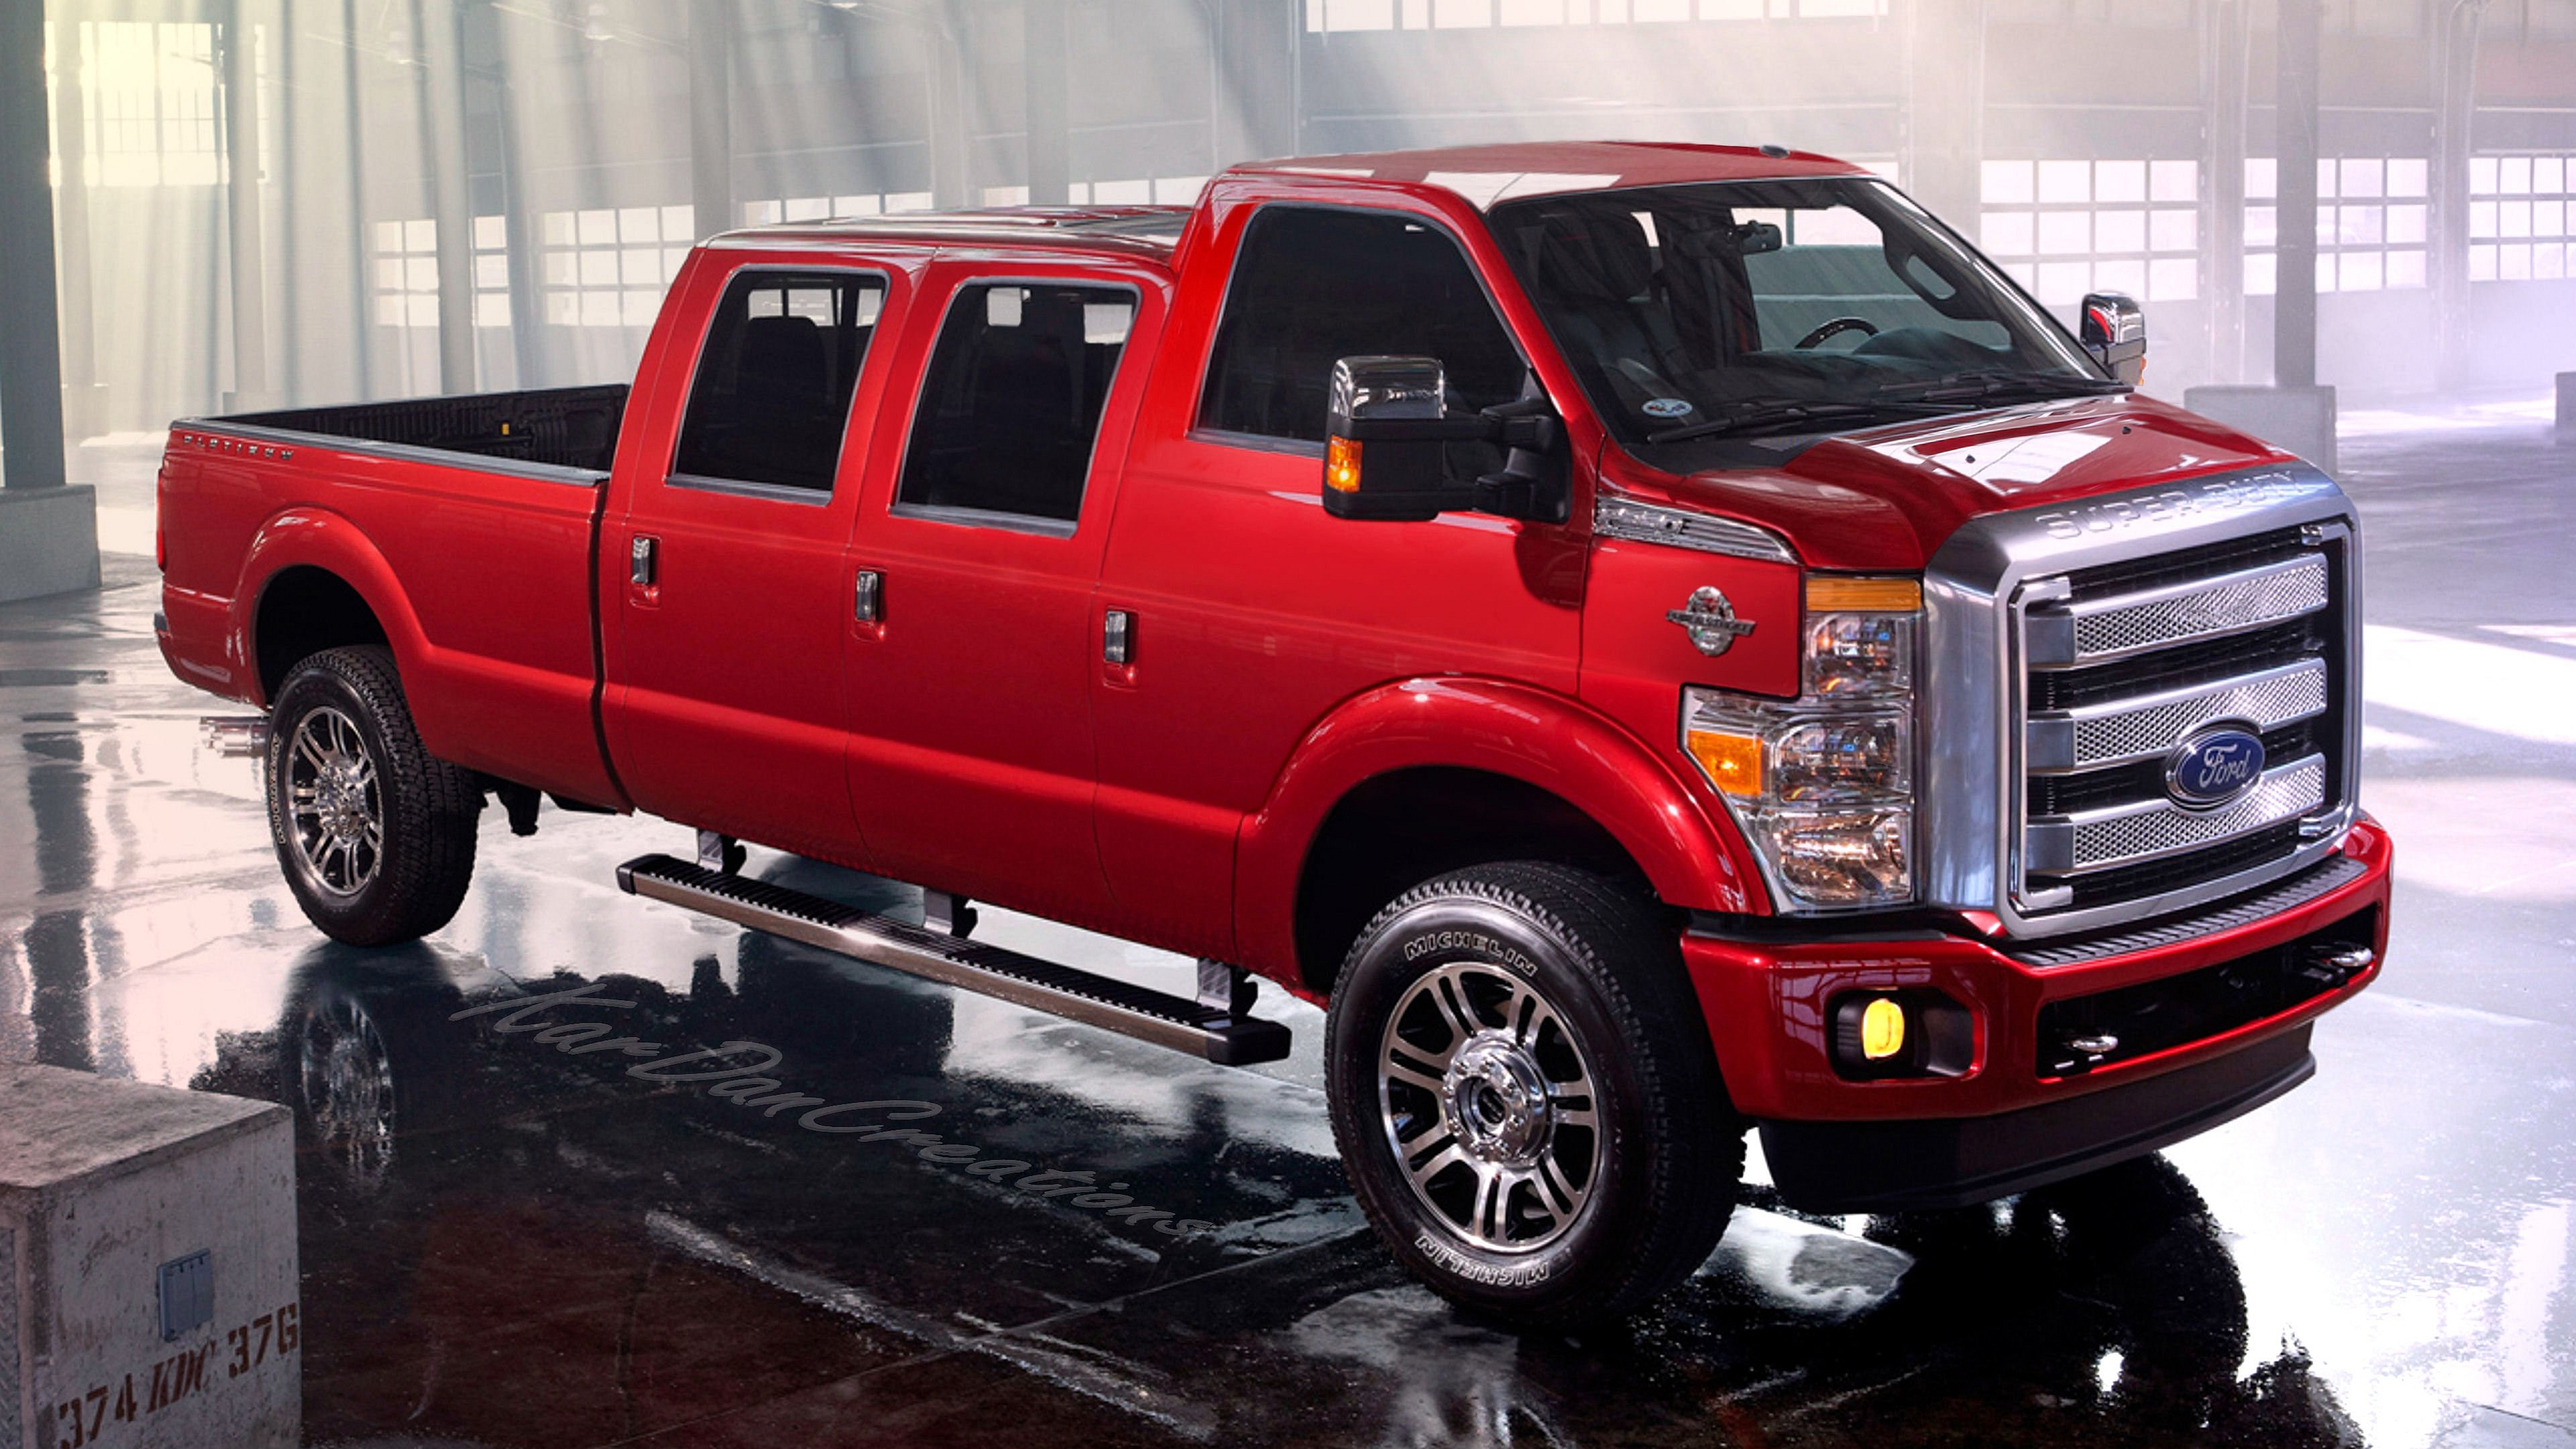 Ford F 350 Super Duty Coe Concept Wallpapers Vehicles Hq Ford F 350 Super Duty Coe Concept Pictures 4k Wallpapers 2019